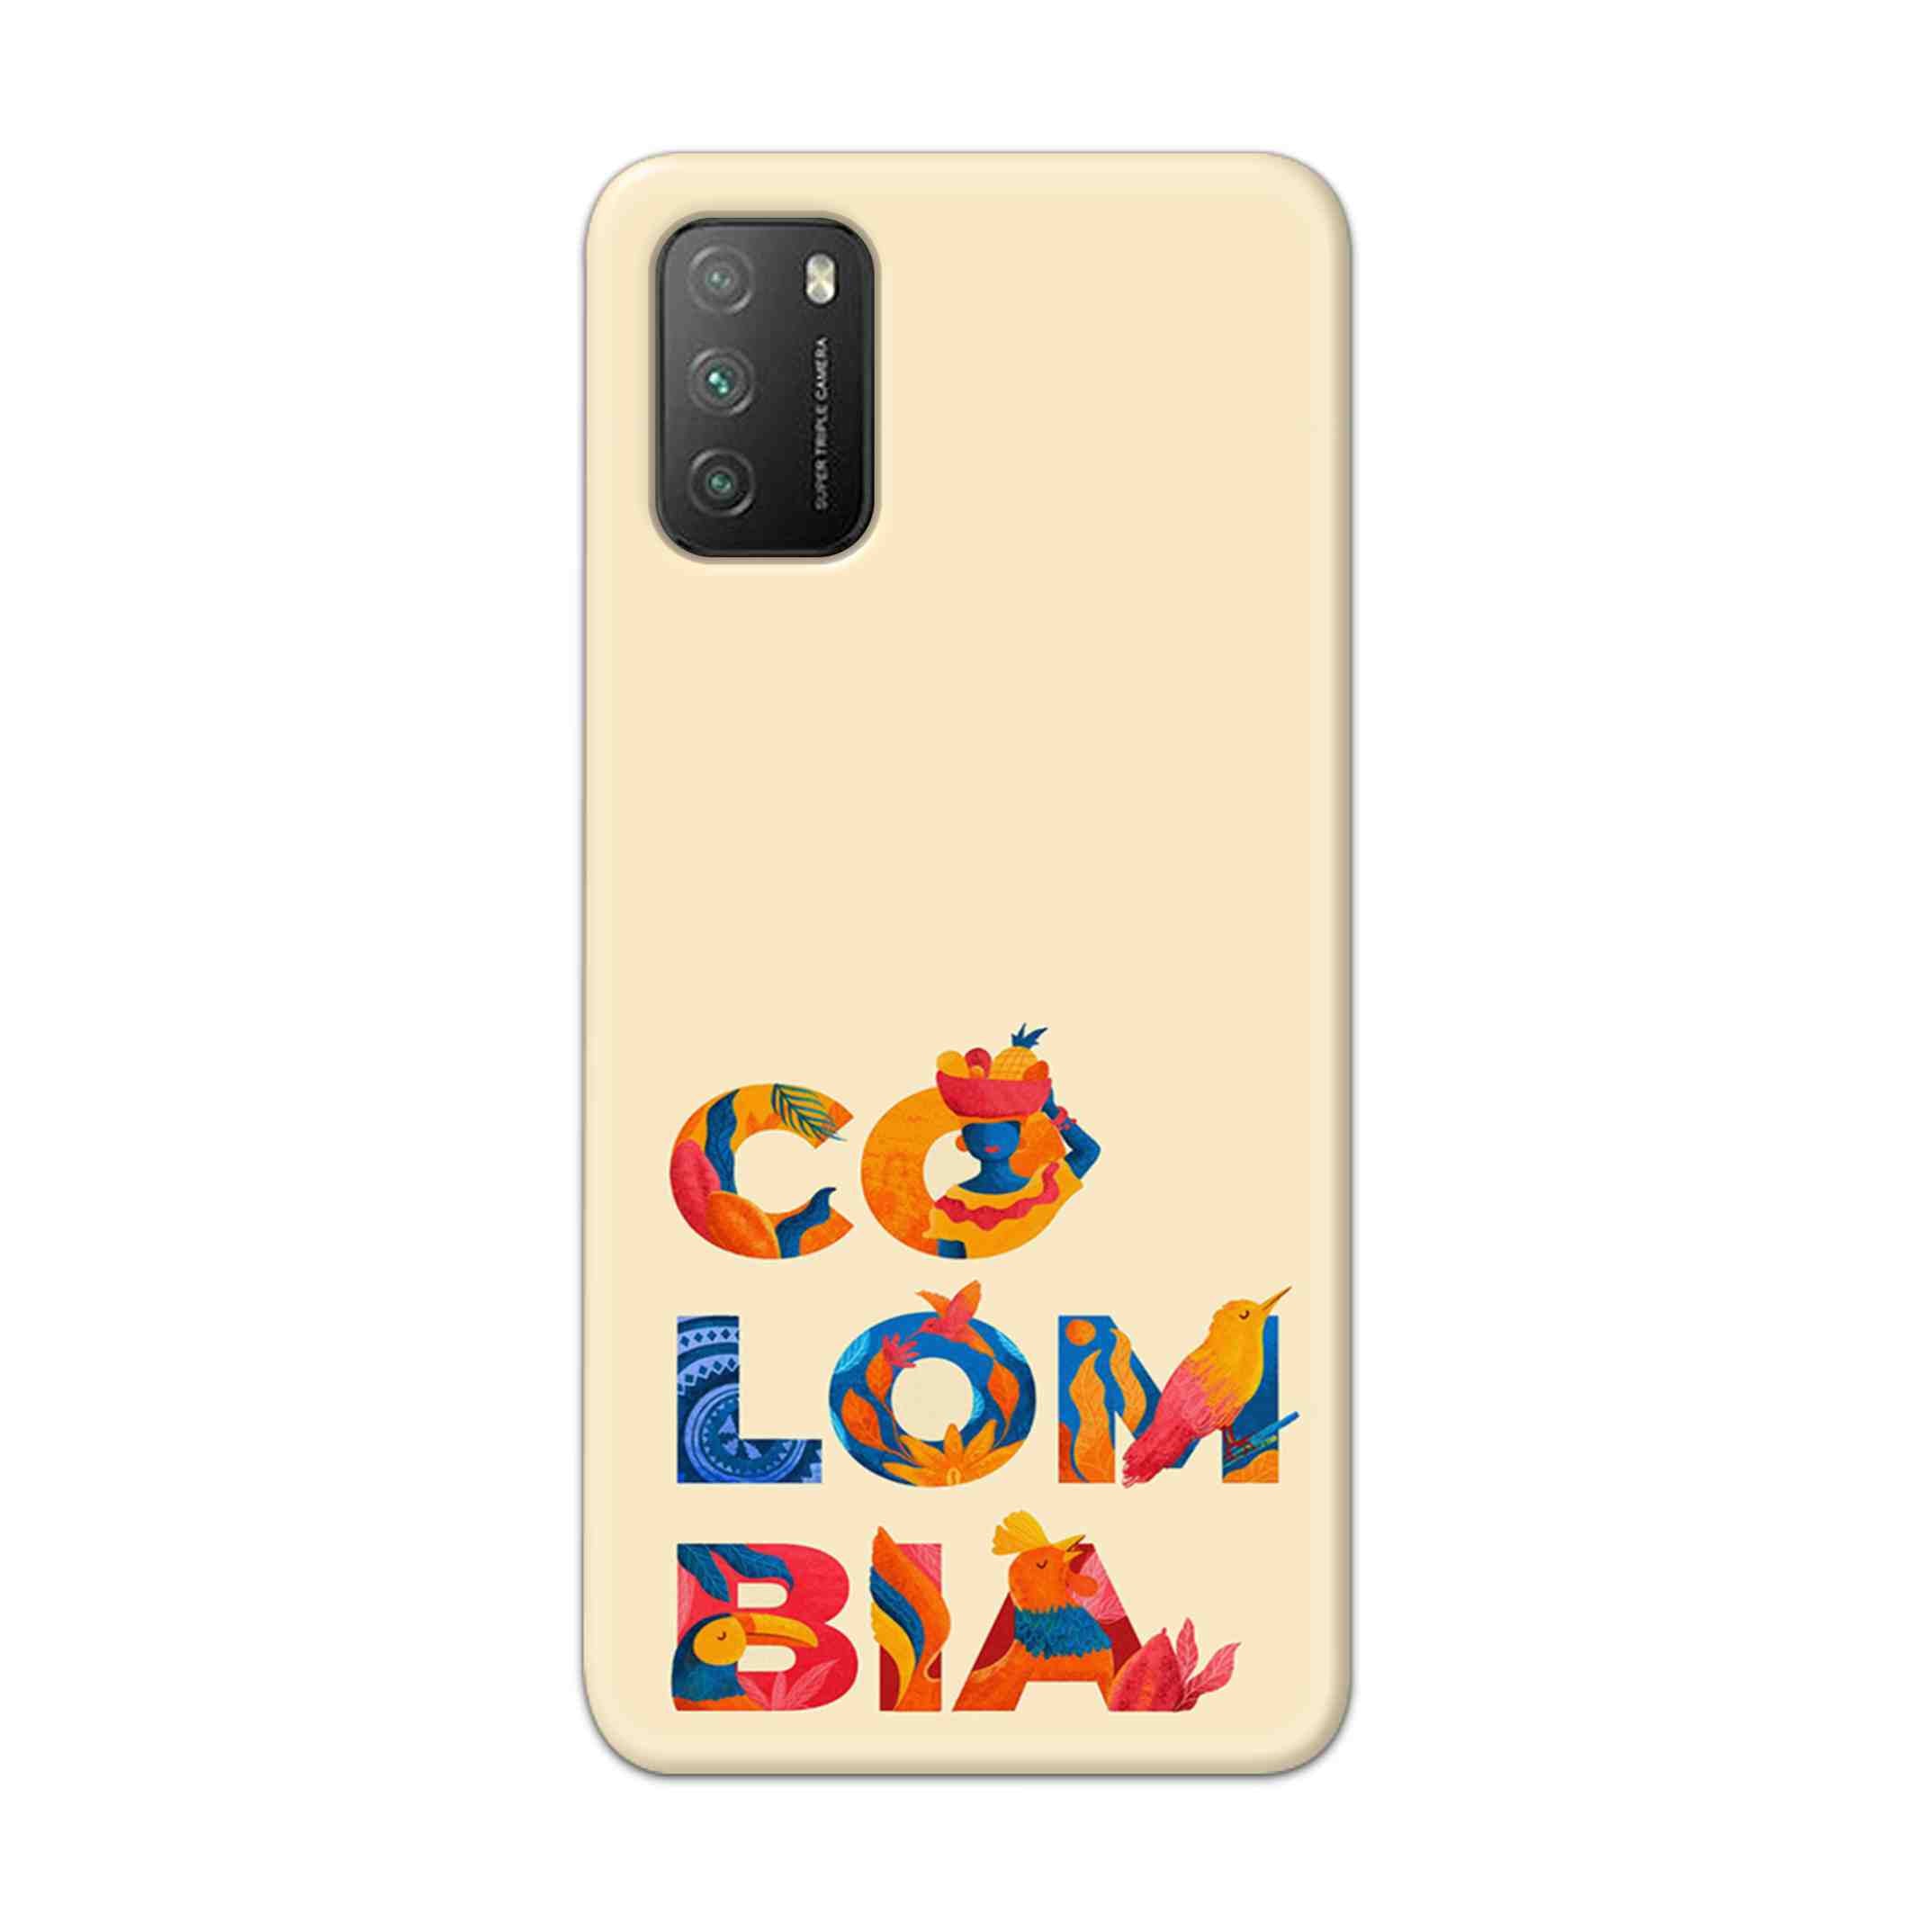 Buy Colombia Hard Back Mobile Phone Case Cover For Poco M3 Online